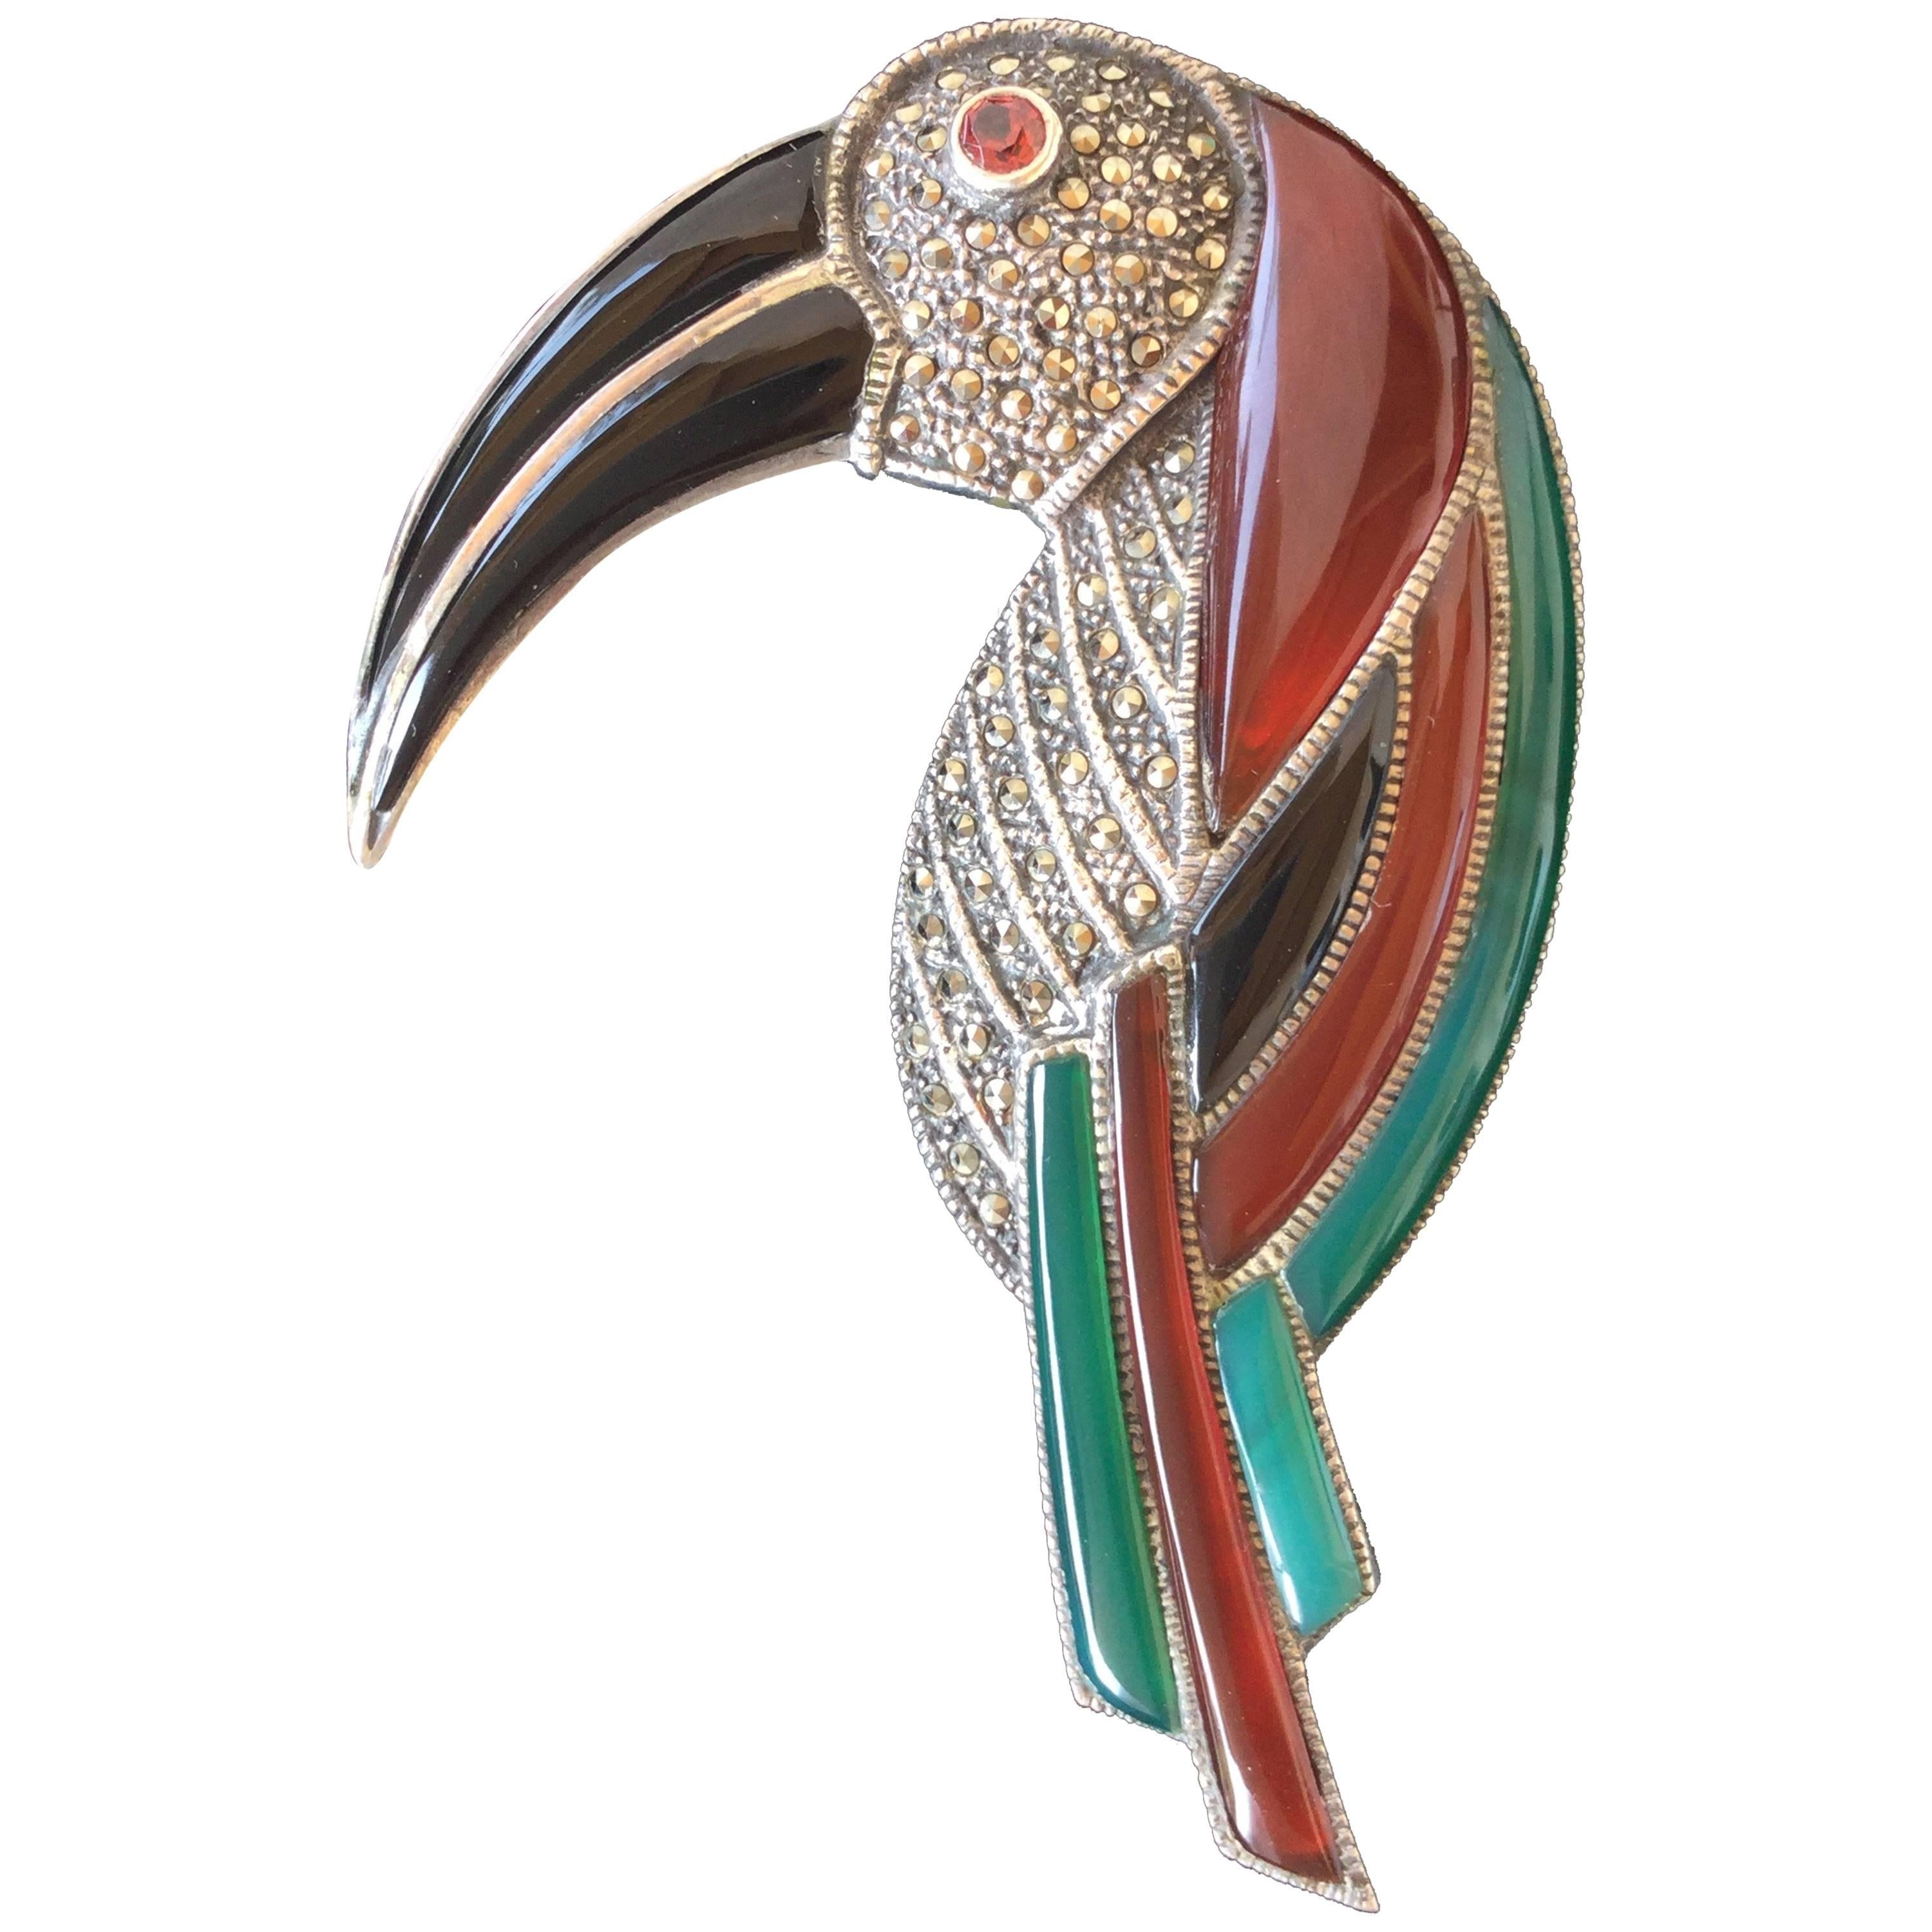 Huge Gemstone and Sterling Silver Toucan Brooch. Deco Style. 1970's.